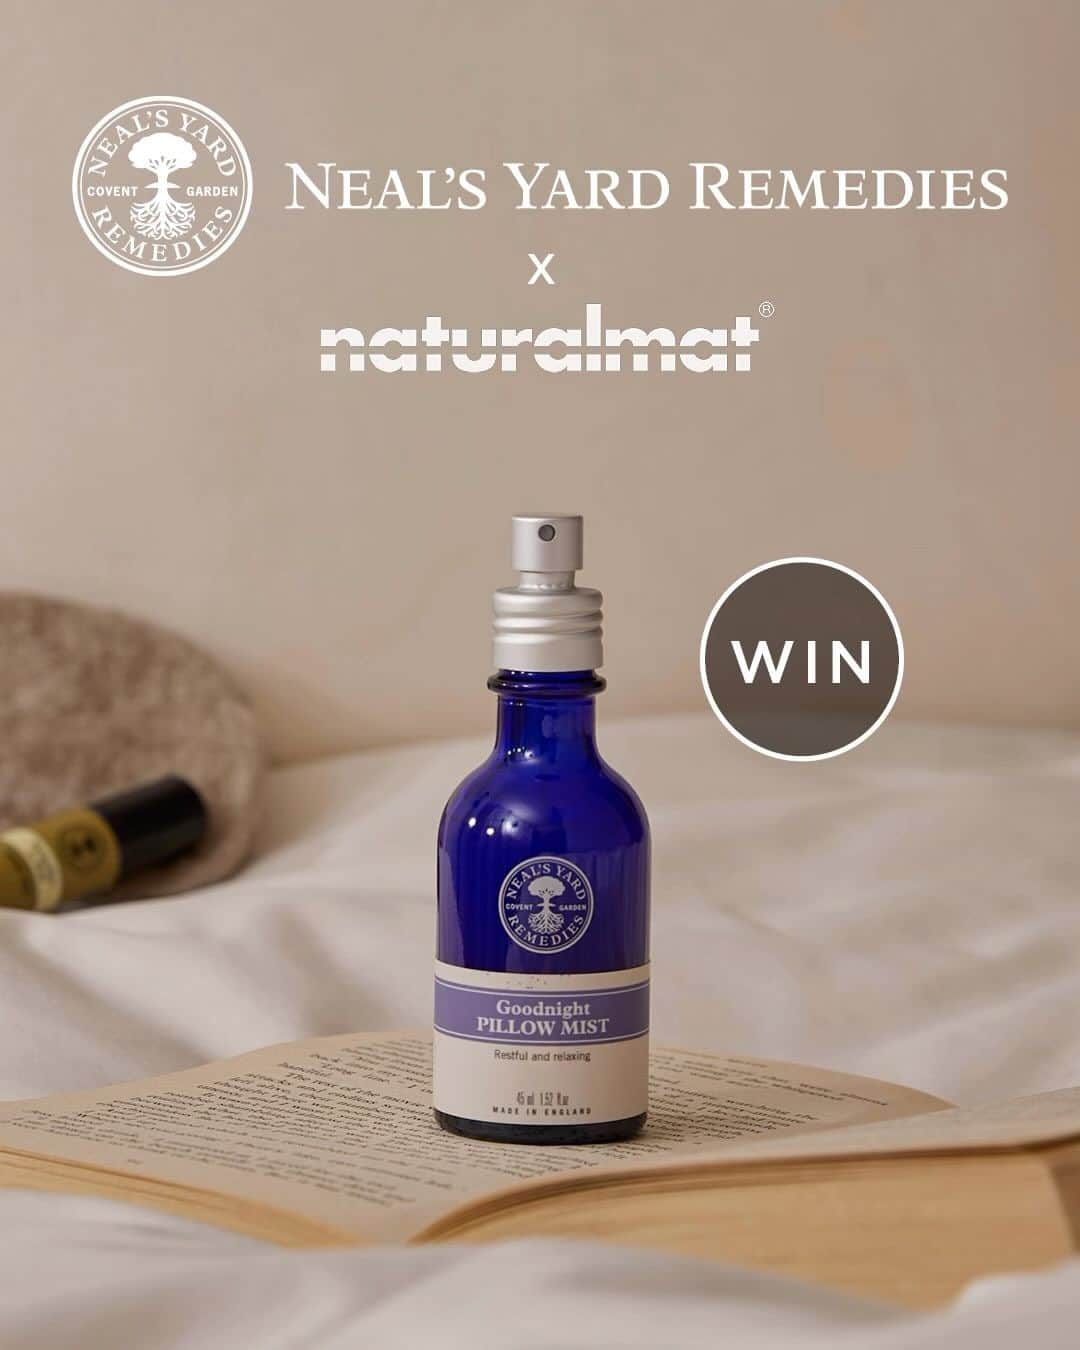 Neal's Yard Remediesのインスタグラム：「Did somebody say Giveaway? 👀 💤💙  We’ve teamed up with @naturalmatuk to offer one lucky winner a Neal’s Yard Remedies x Naturalmat Organic Sleep Bundle worth up to £750!   💙 For your chance to win, simply visit the link in our bio 💙   Our winner will receive two Naturalmat Organic Wool Pillows, an Organic Wool Duvet, and a Washable Wool Mattress Protector, plus Neal’s Yard Remedies’ Goodnight Pillow Mist, Seaweed and Arnica Bath Salts, Aromatic Foaming Bath, and an Frankincense Intense™ Age Defying Overnight Mask.  For a chance to win, entrants must submit the online form. Deadline for entries is 5th November 2023 at 23.59. T&Cs apply, follow the link in our bio to find out more. ______________________________________________」